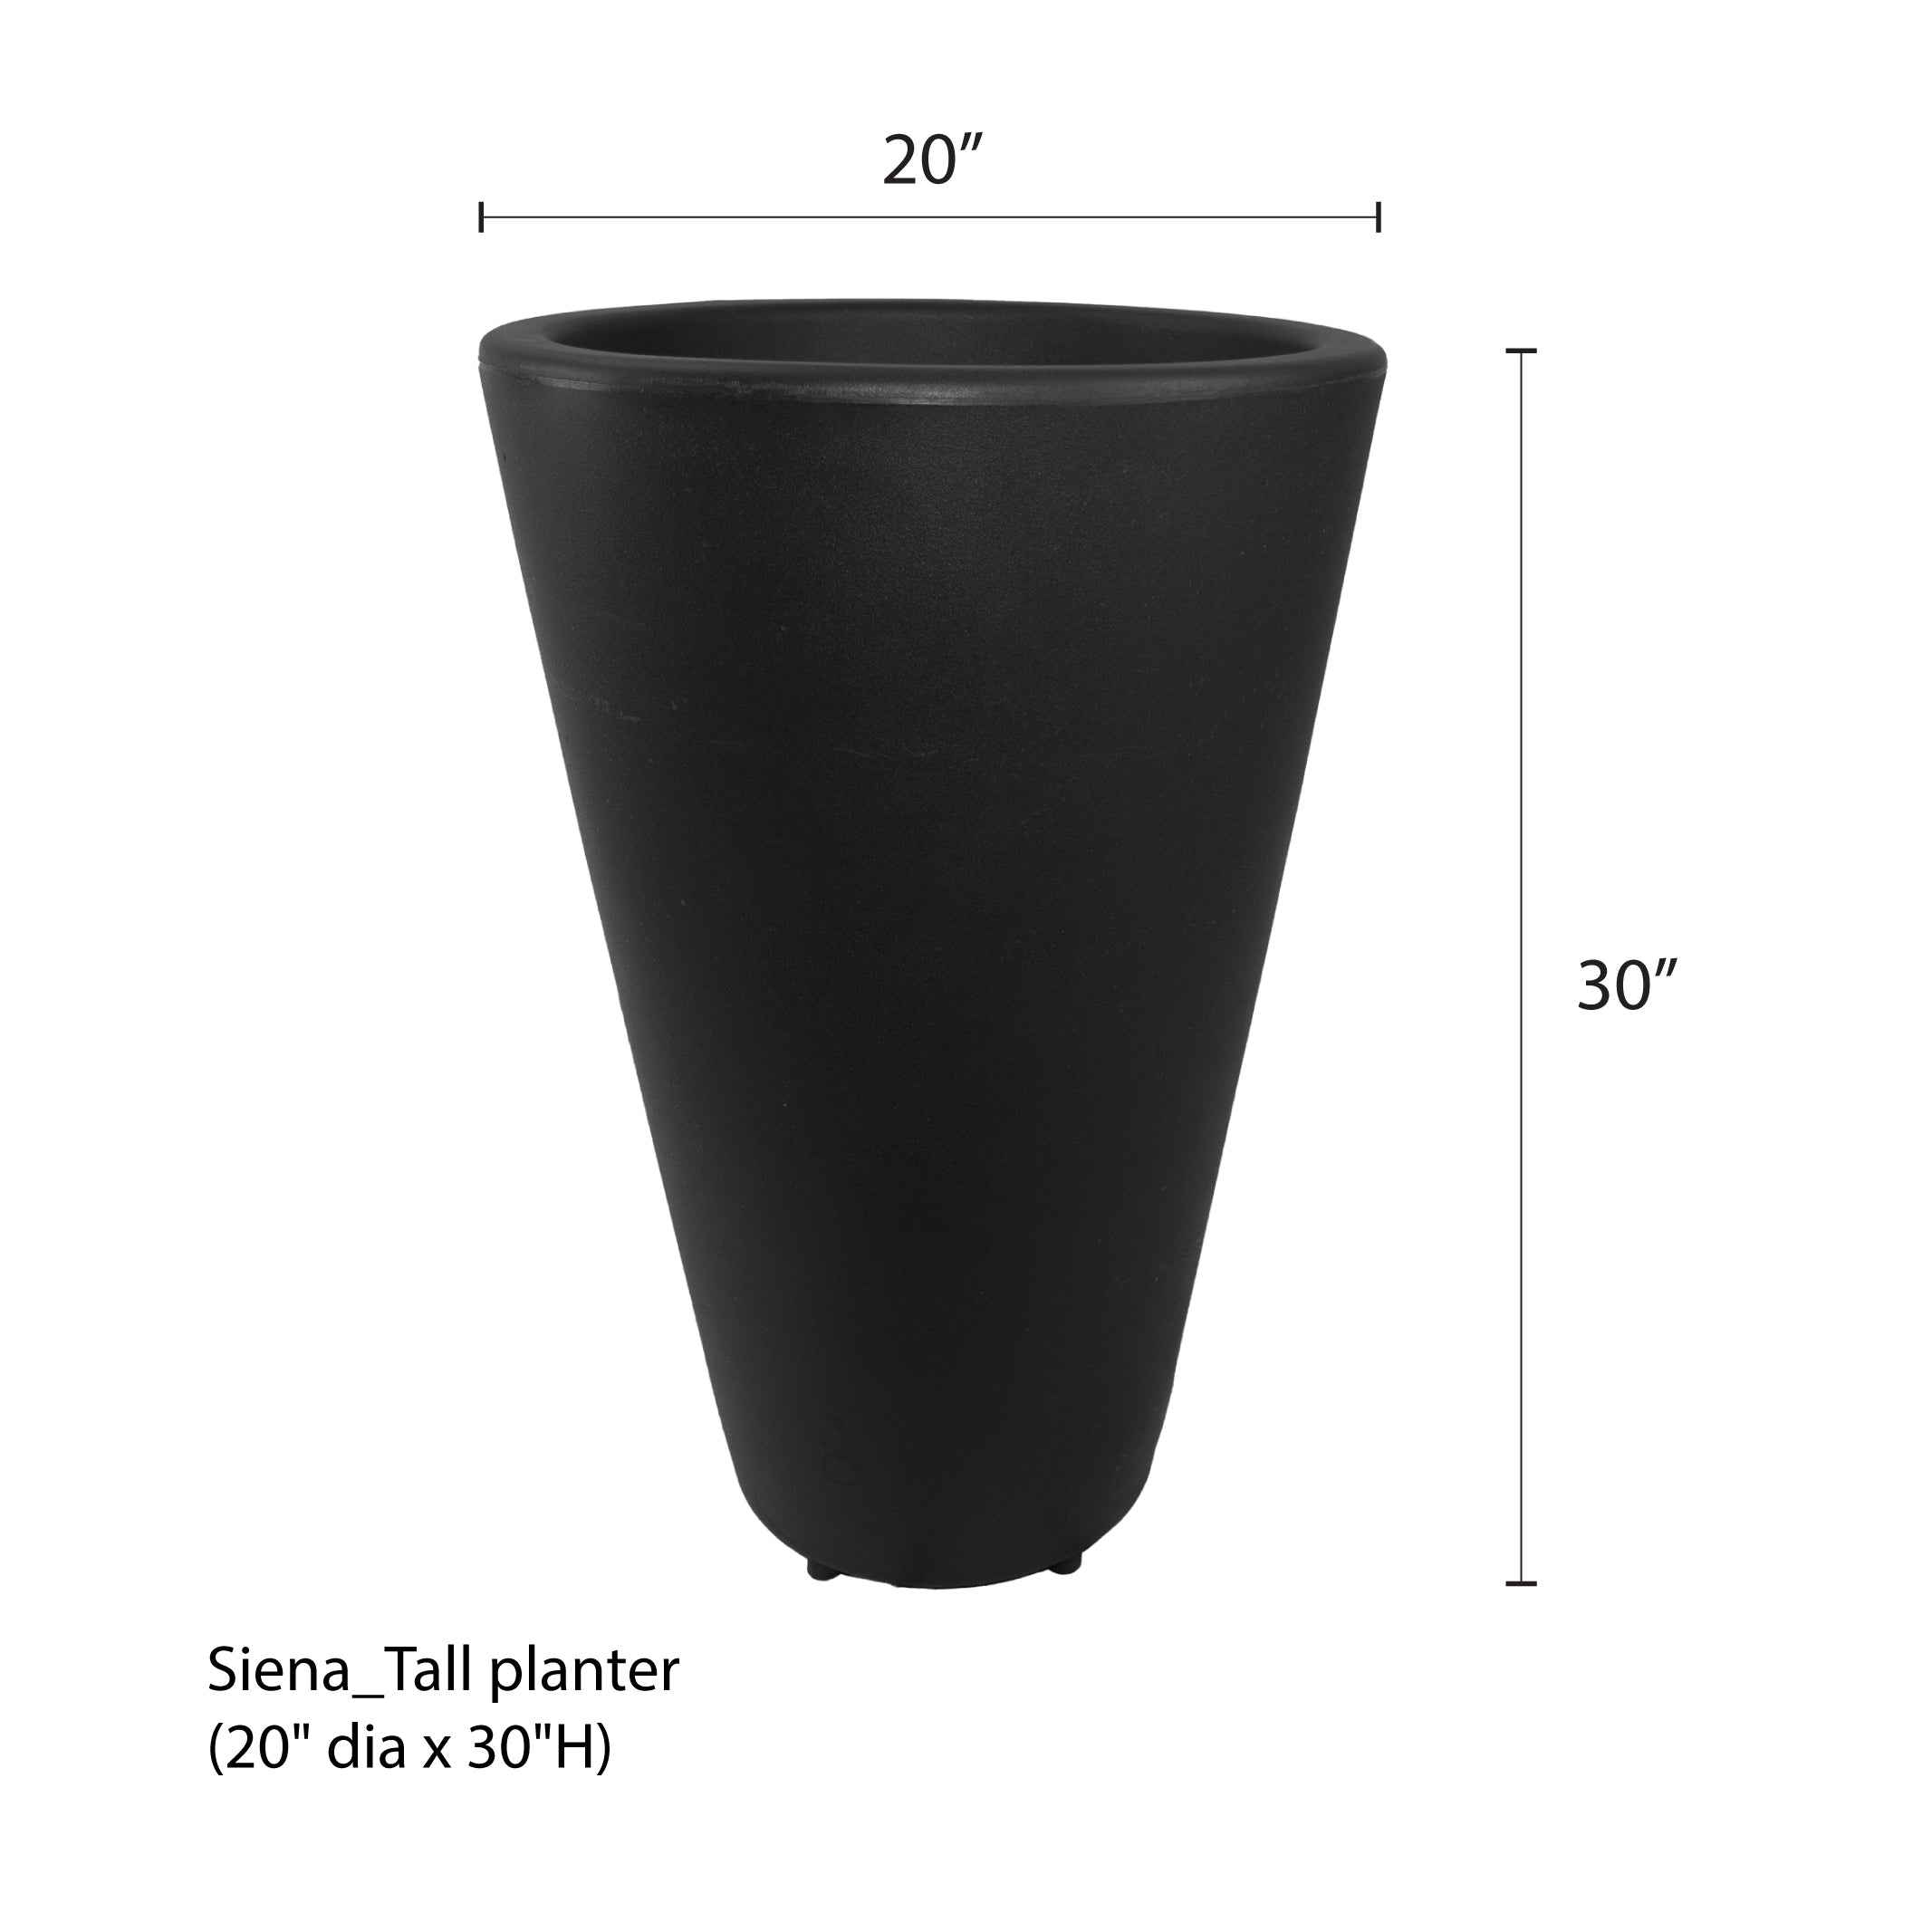 Graphite tall siena planter with measurements